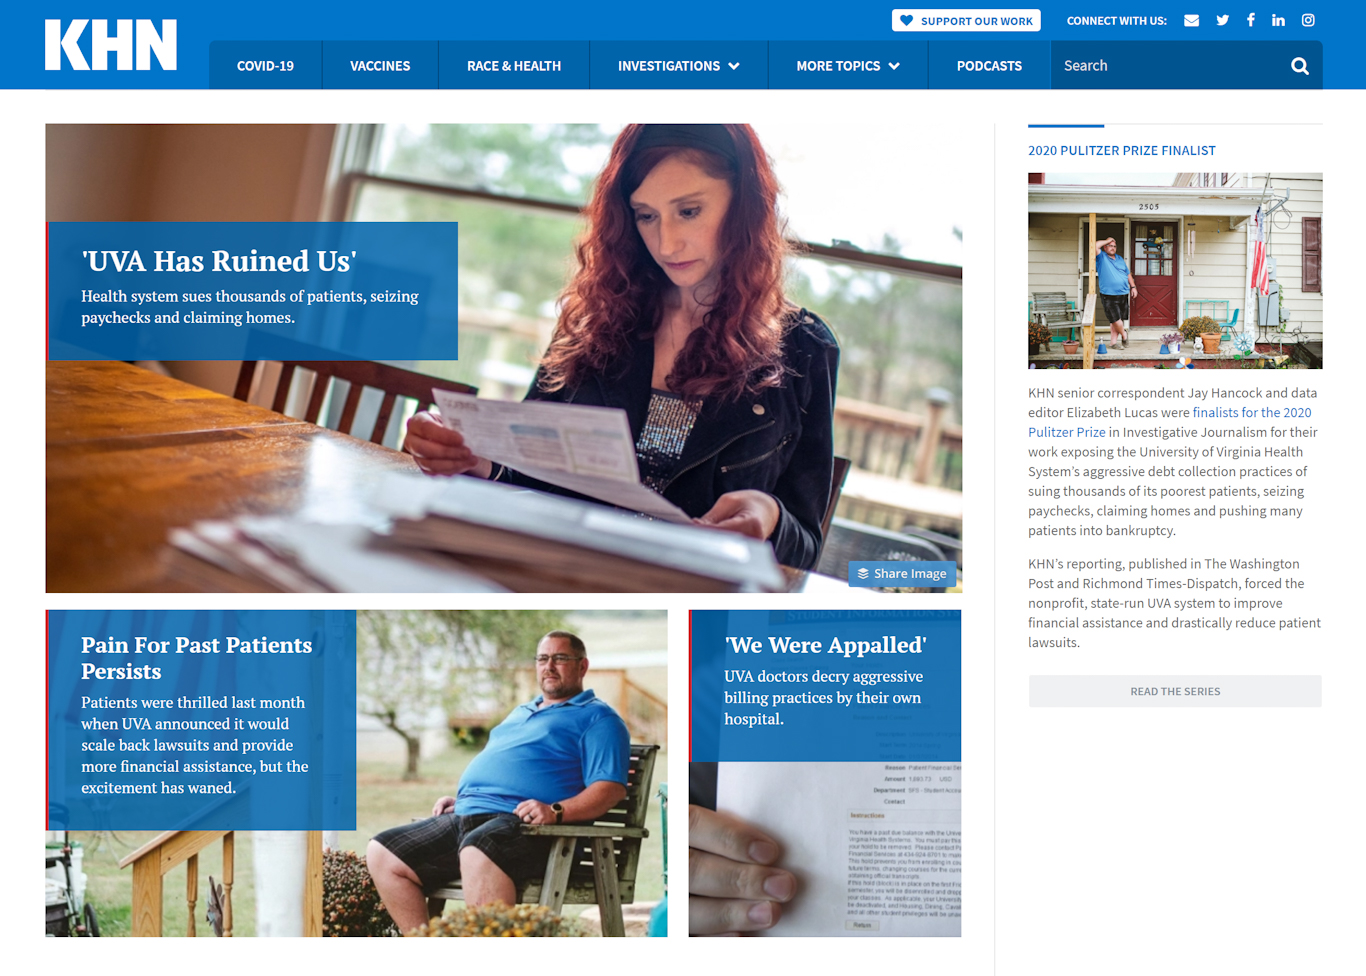 Images laid out on a website, surrounding by words. One picture shows a woman at a table looking over a document. Another picture shows a man sitting in a chair on a porch. A third picture shows a hand holding a paper.